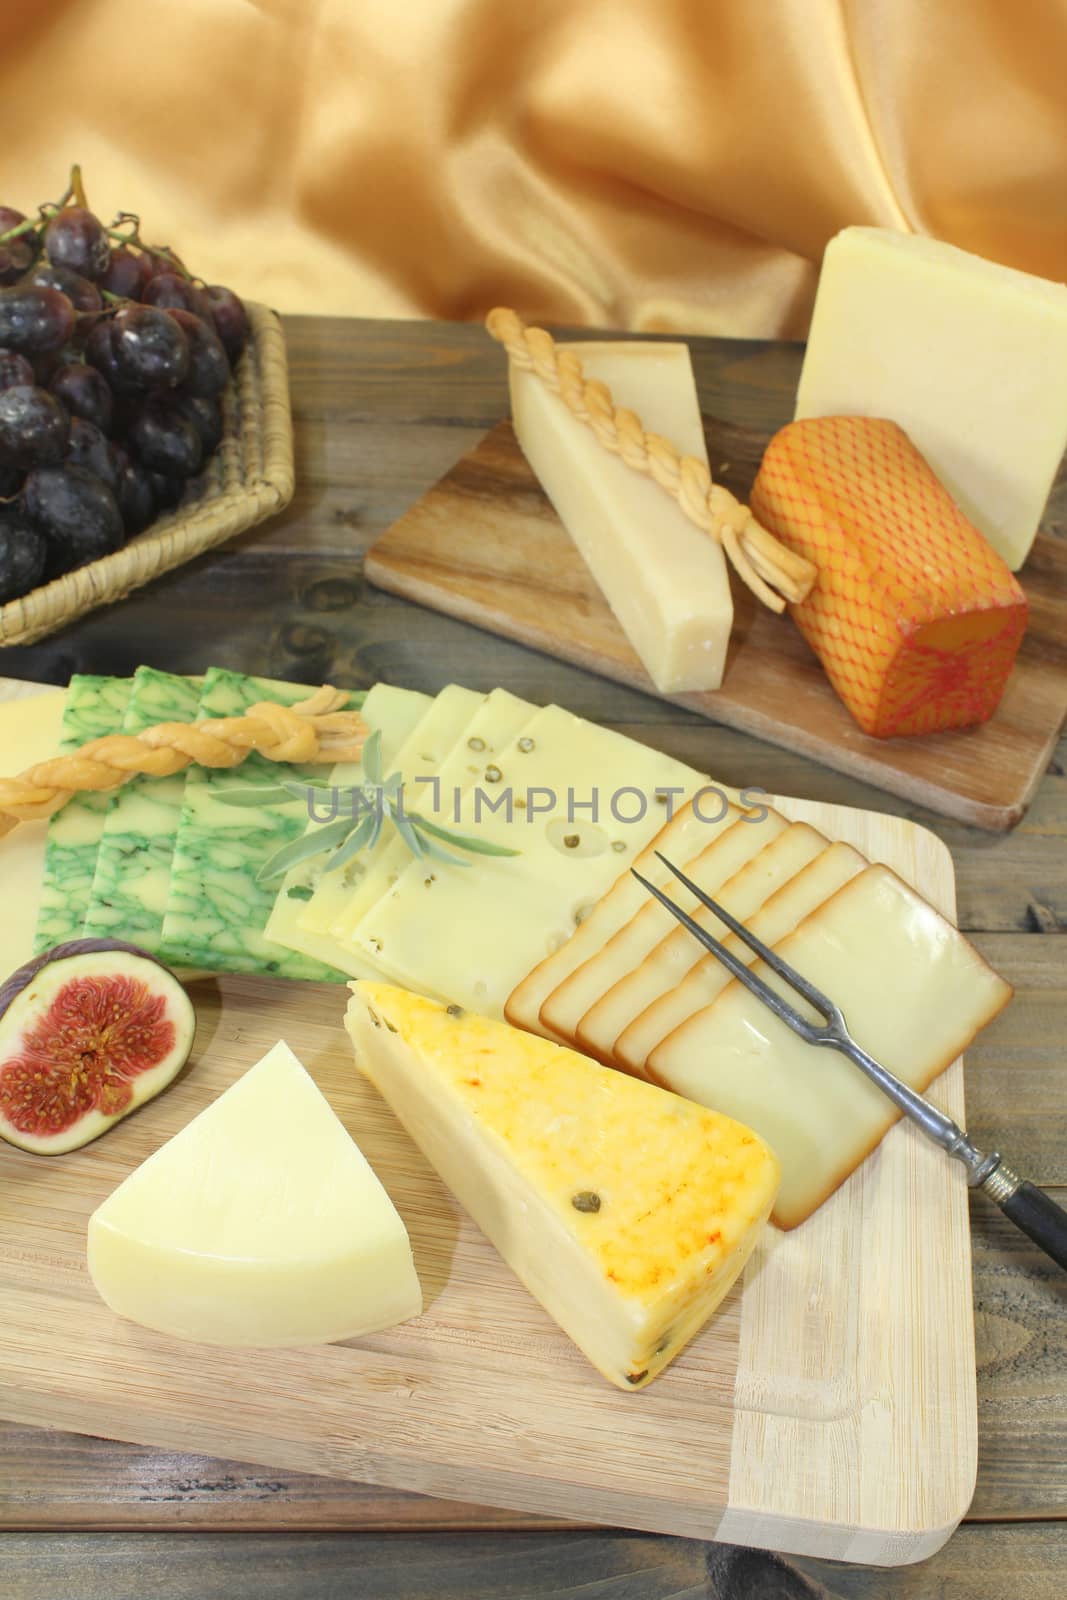 Slices of cheese with grapes, radishes, figs and fork